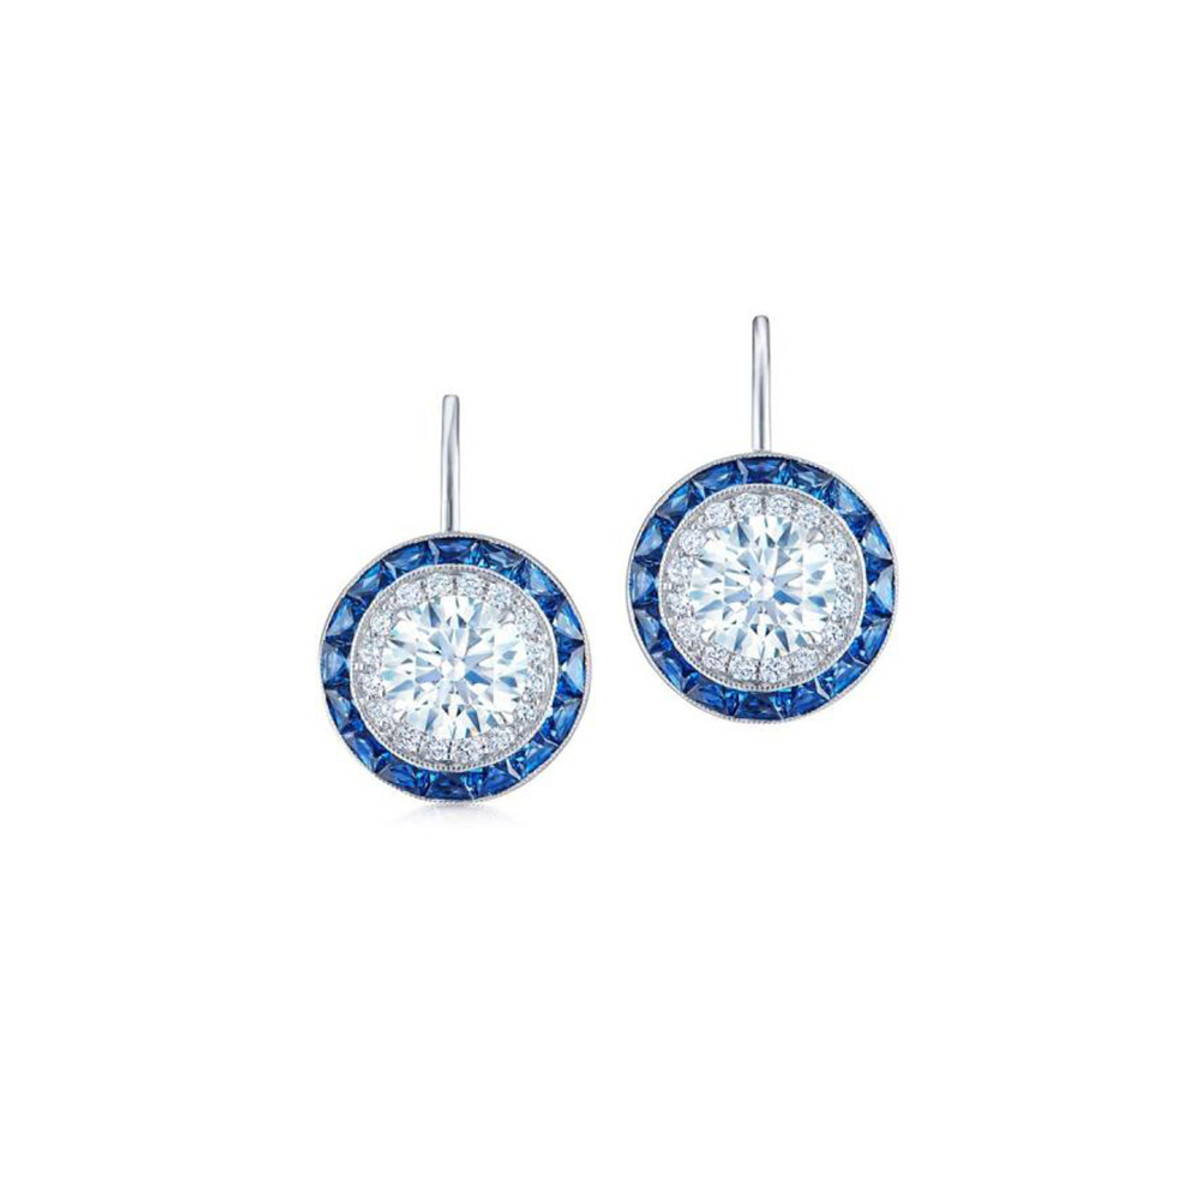 Kwiat  Silhouette Drop Earrings with Diamonds and Sapphires-28399 Product Image